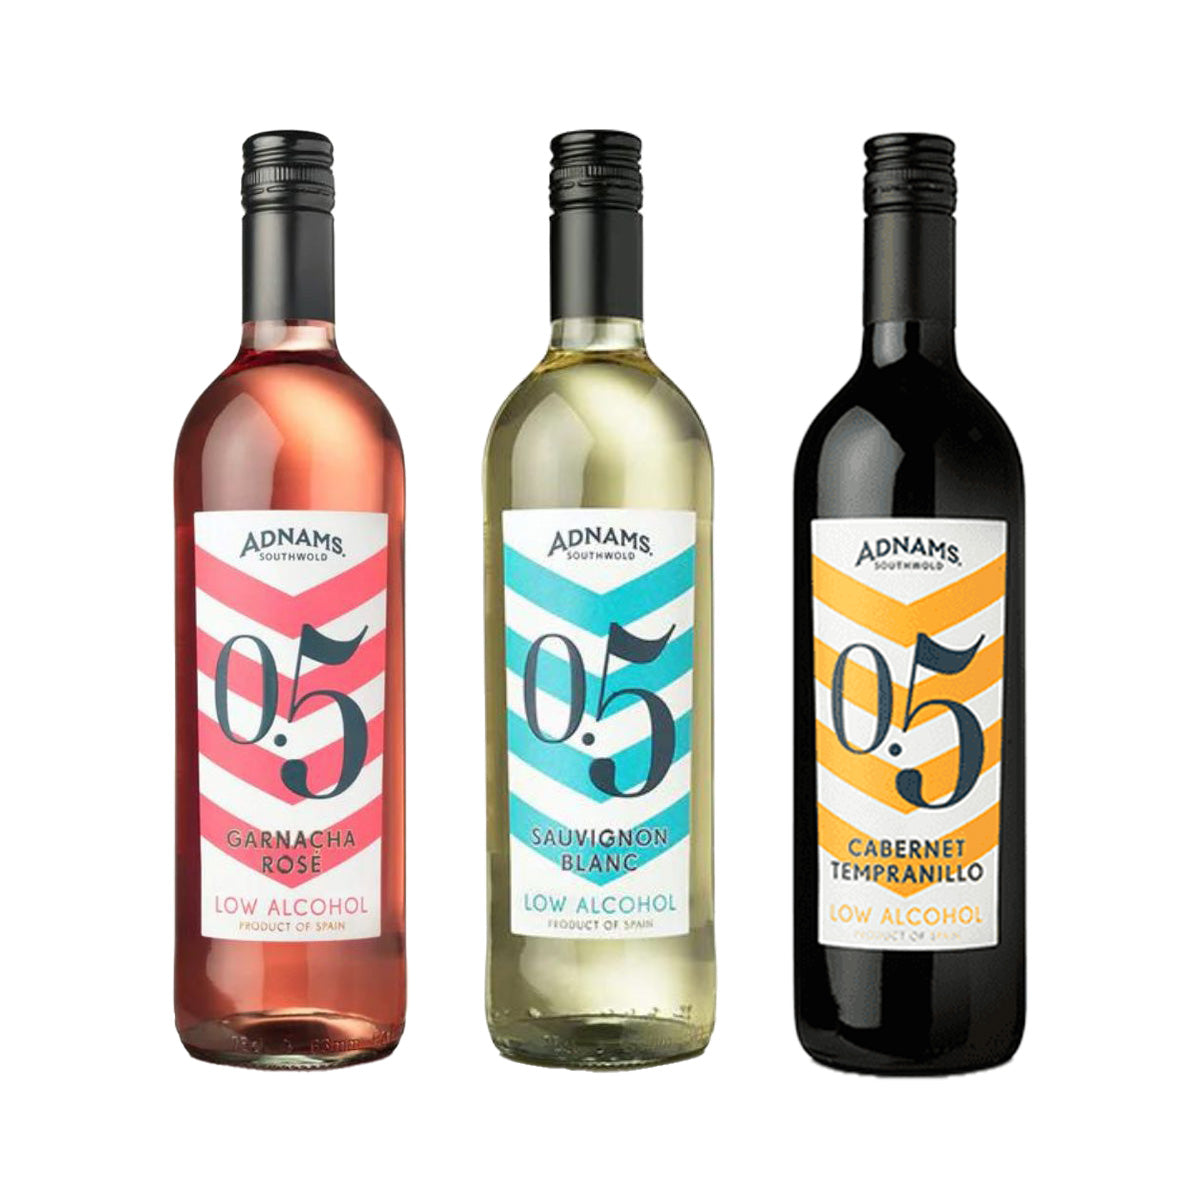 Three bottles of Adnams low alcohol wine 0.5% - one Garnacha rose, one Sauvignon white and one Cabernet red. 